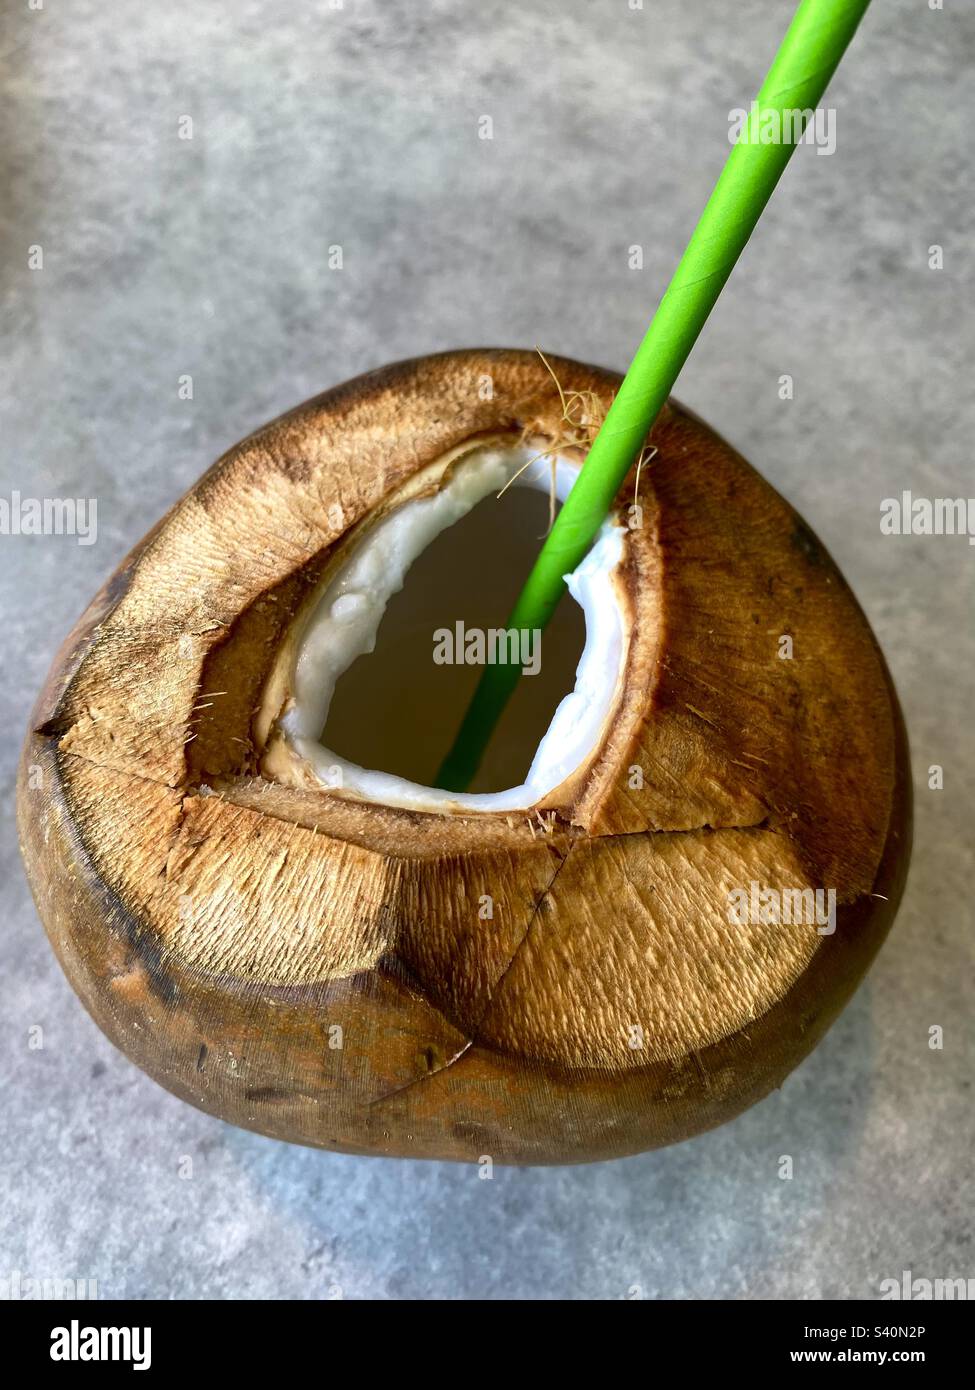 Coconut with a green straw Stock Photo